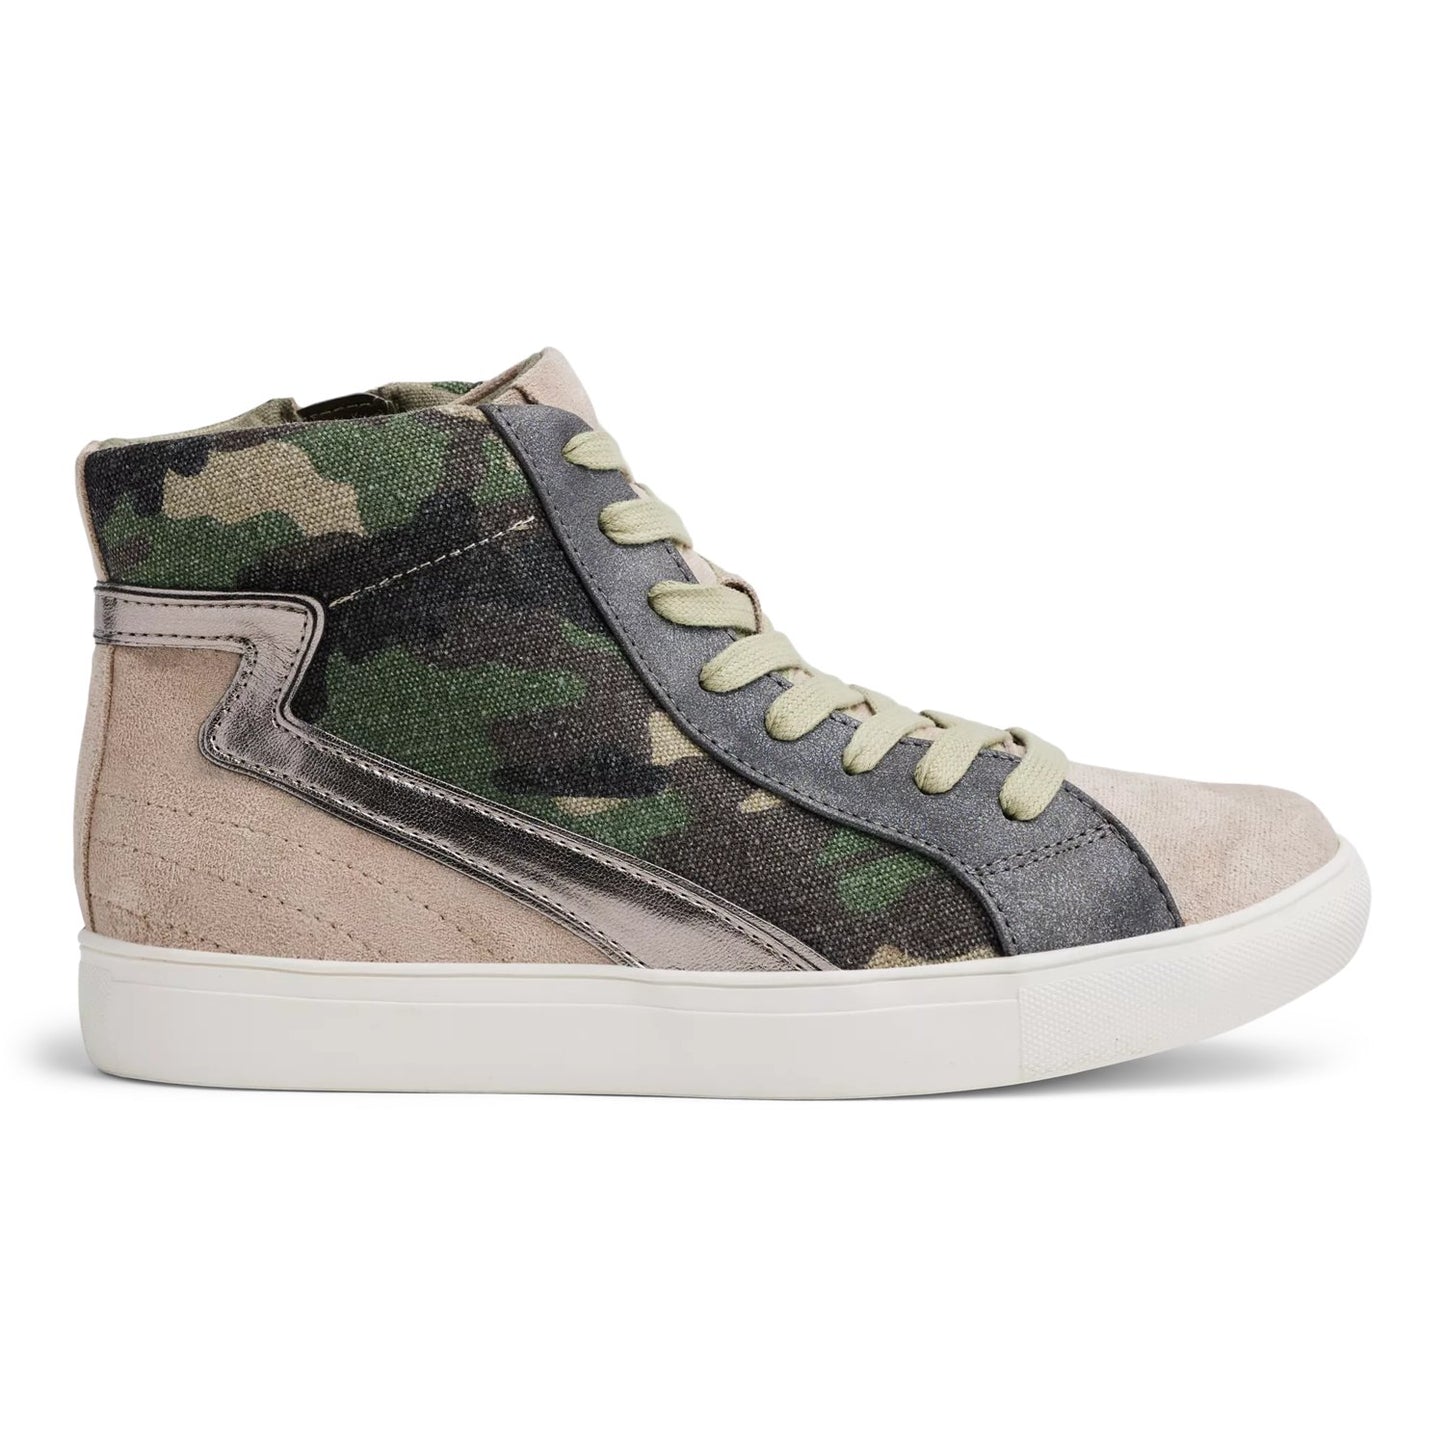 Matchmaker High Top Sneakers